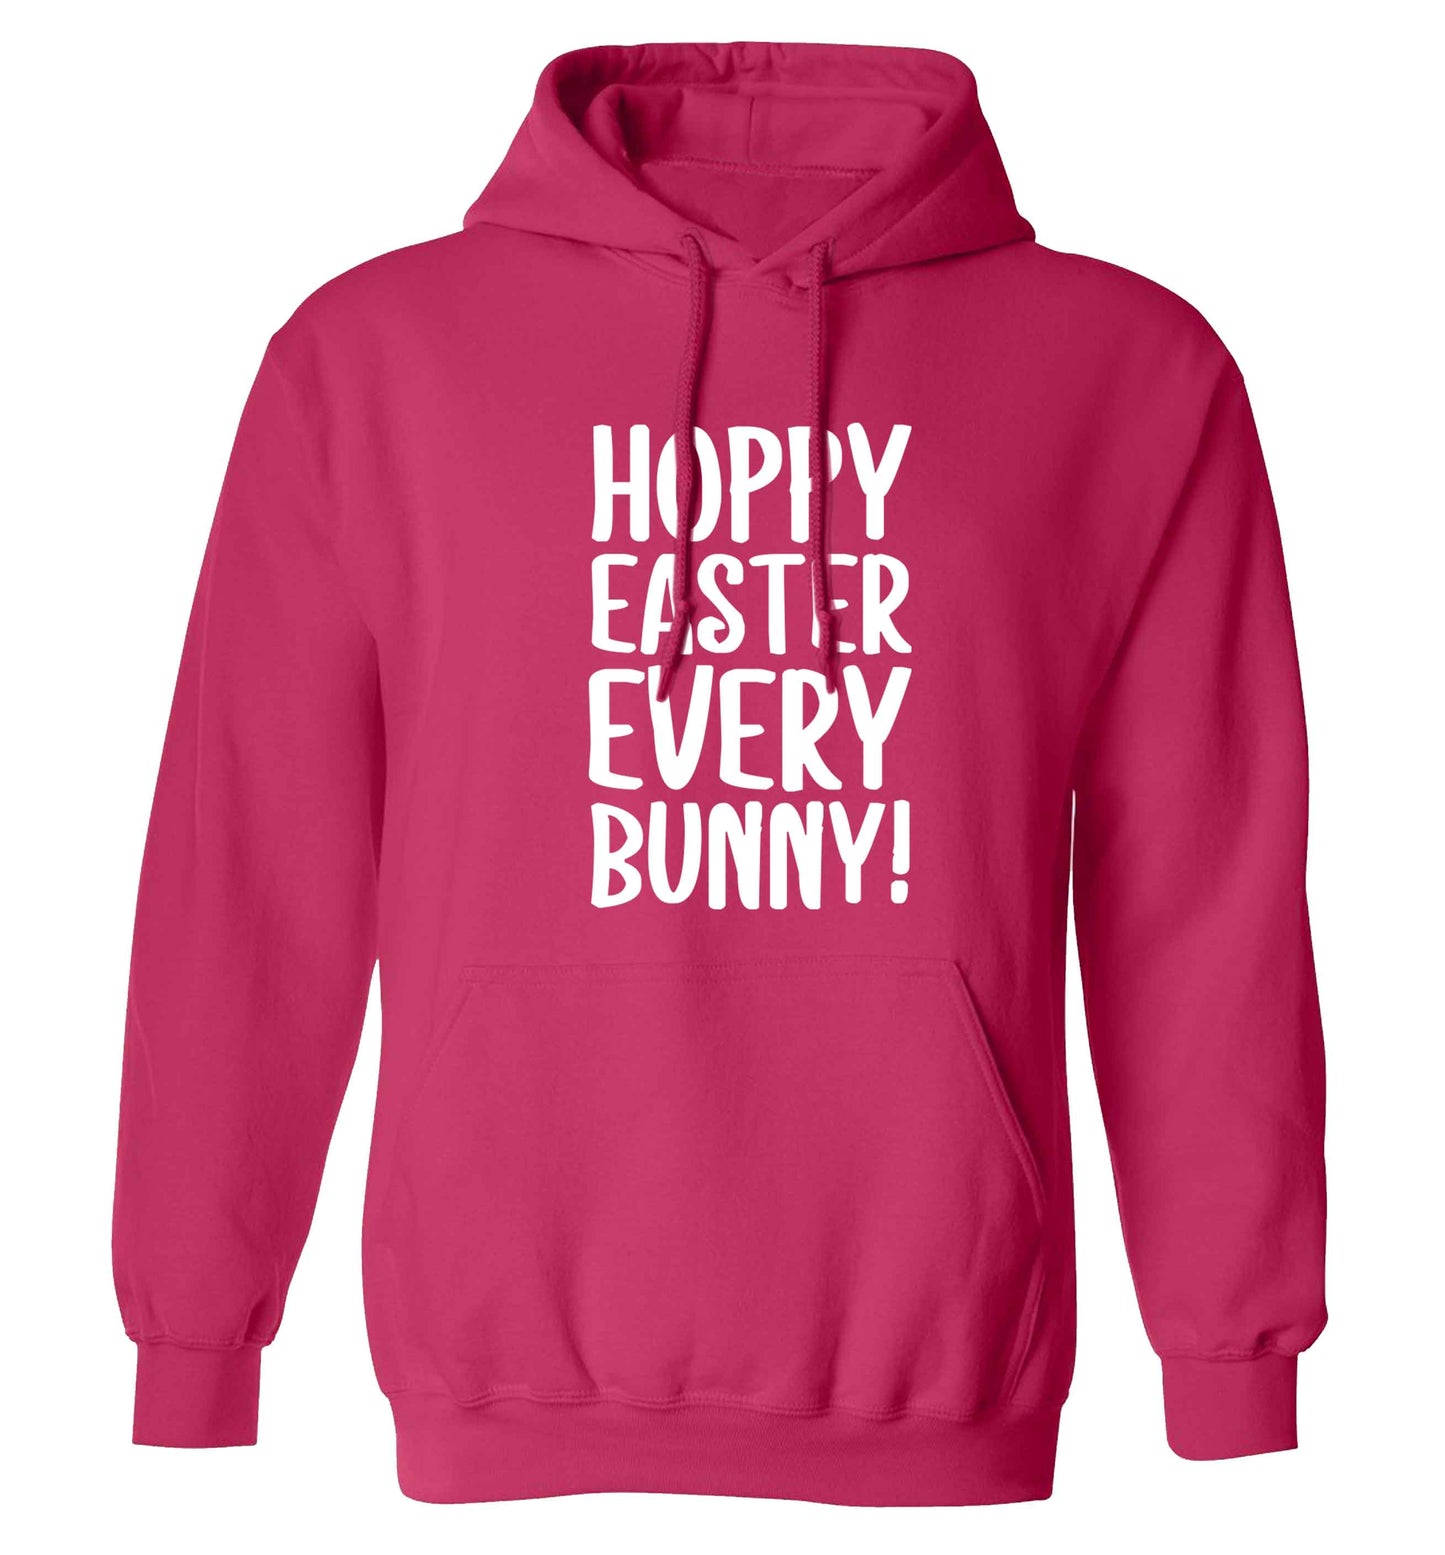 Hoppy Easter every bunny! adults unisex pink hoodie 2XL